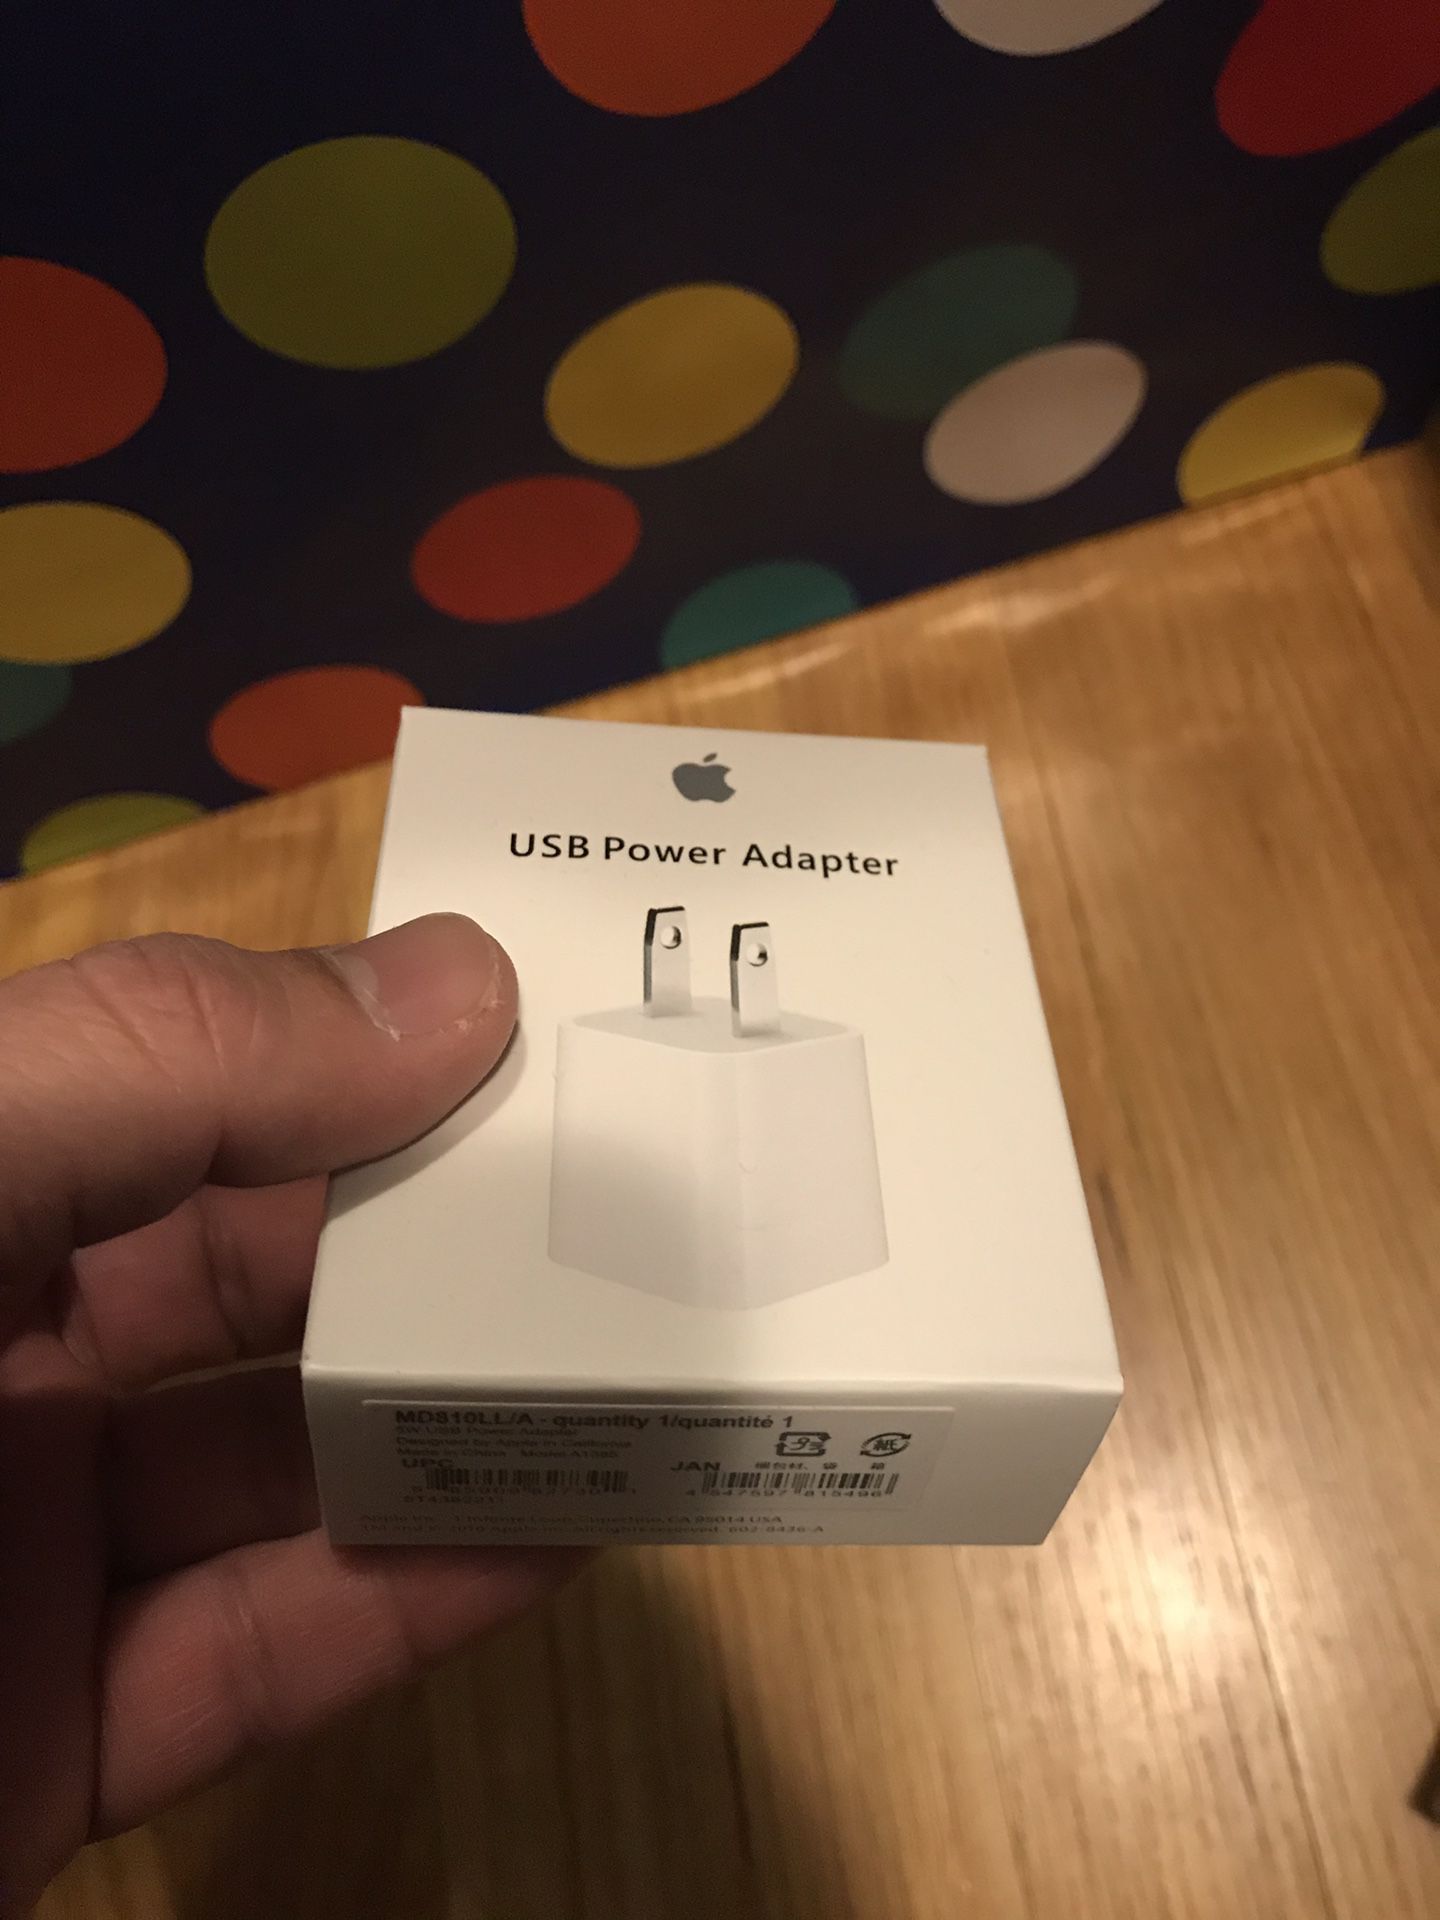 Brand new Apple Wall Charger. Fixed price